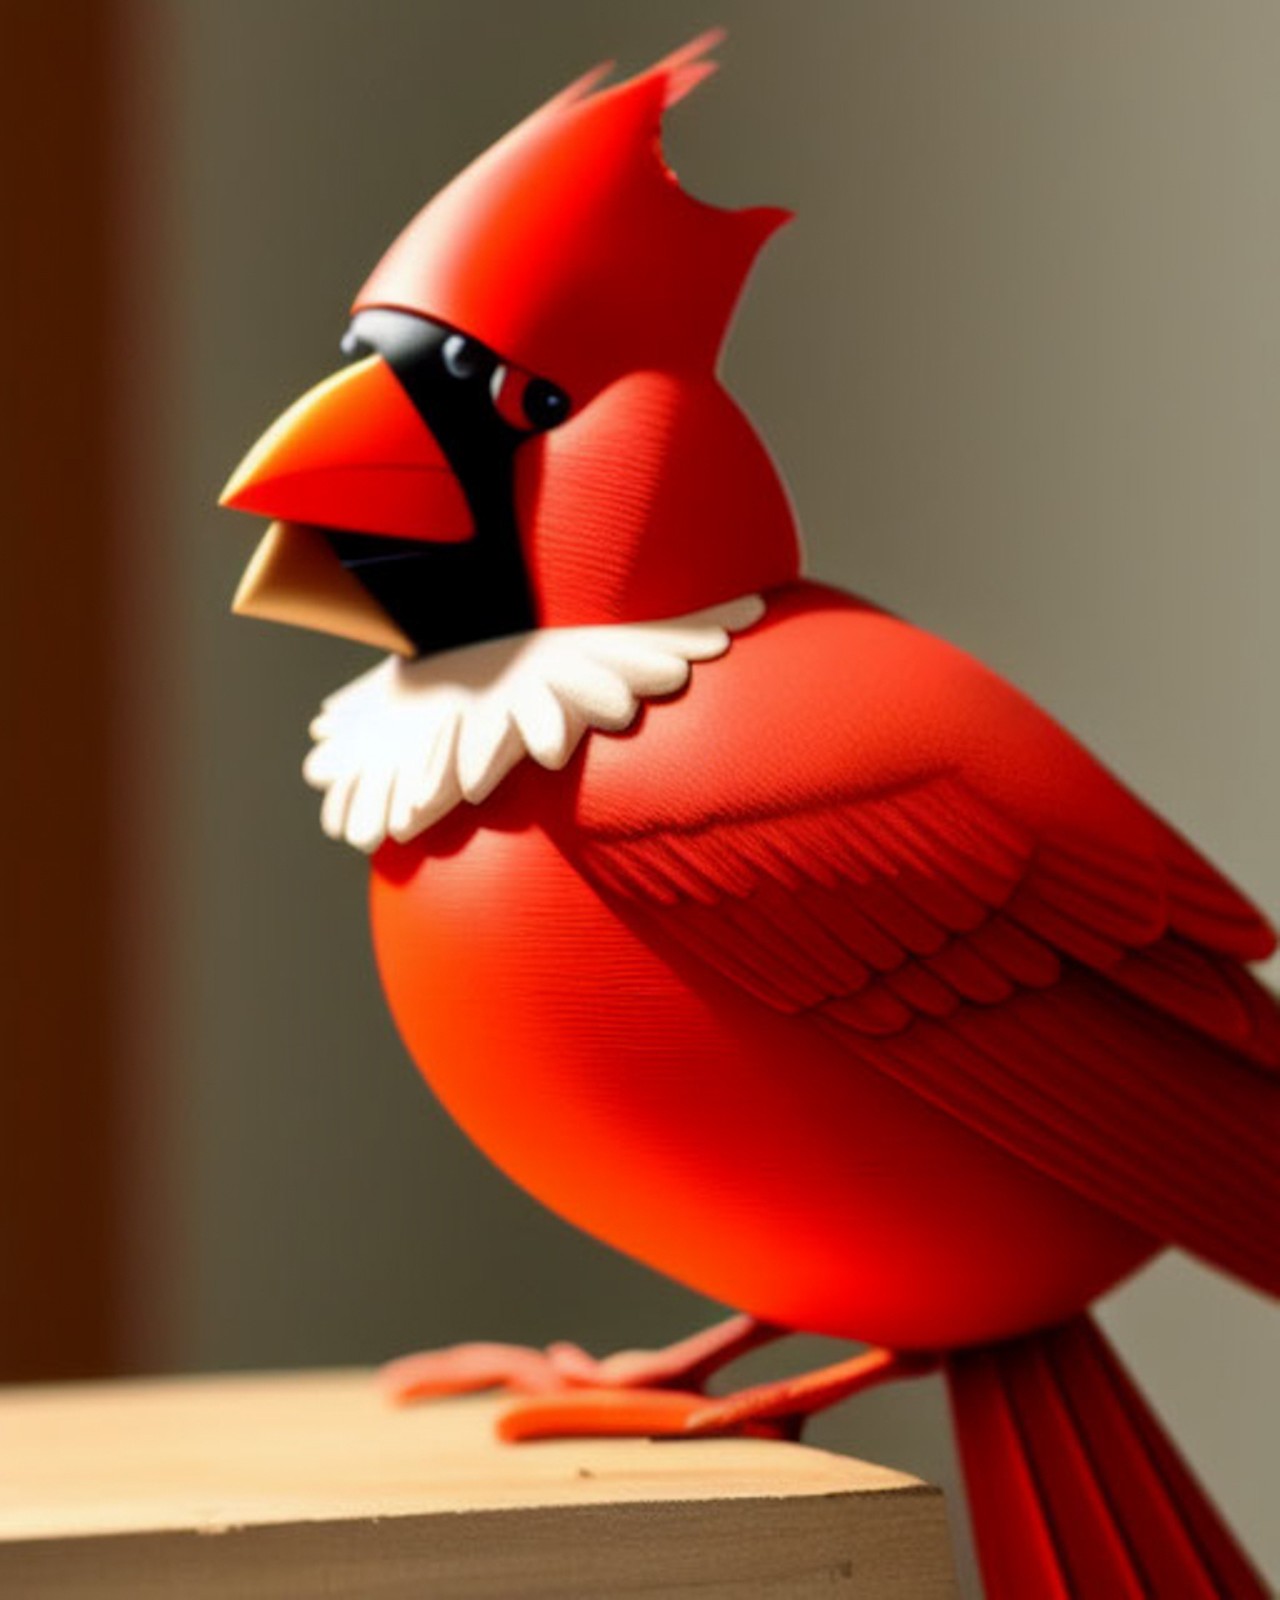 Prompt: "The mascot Louie the Cardinal"